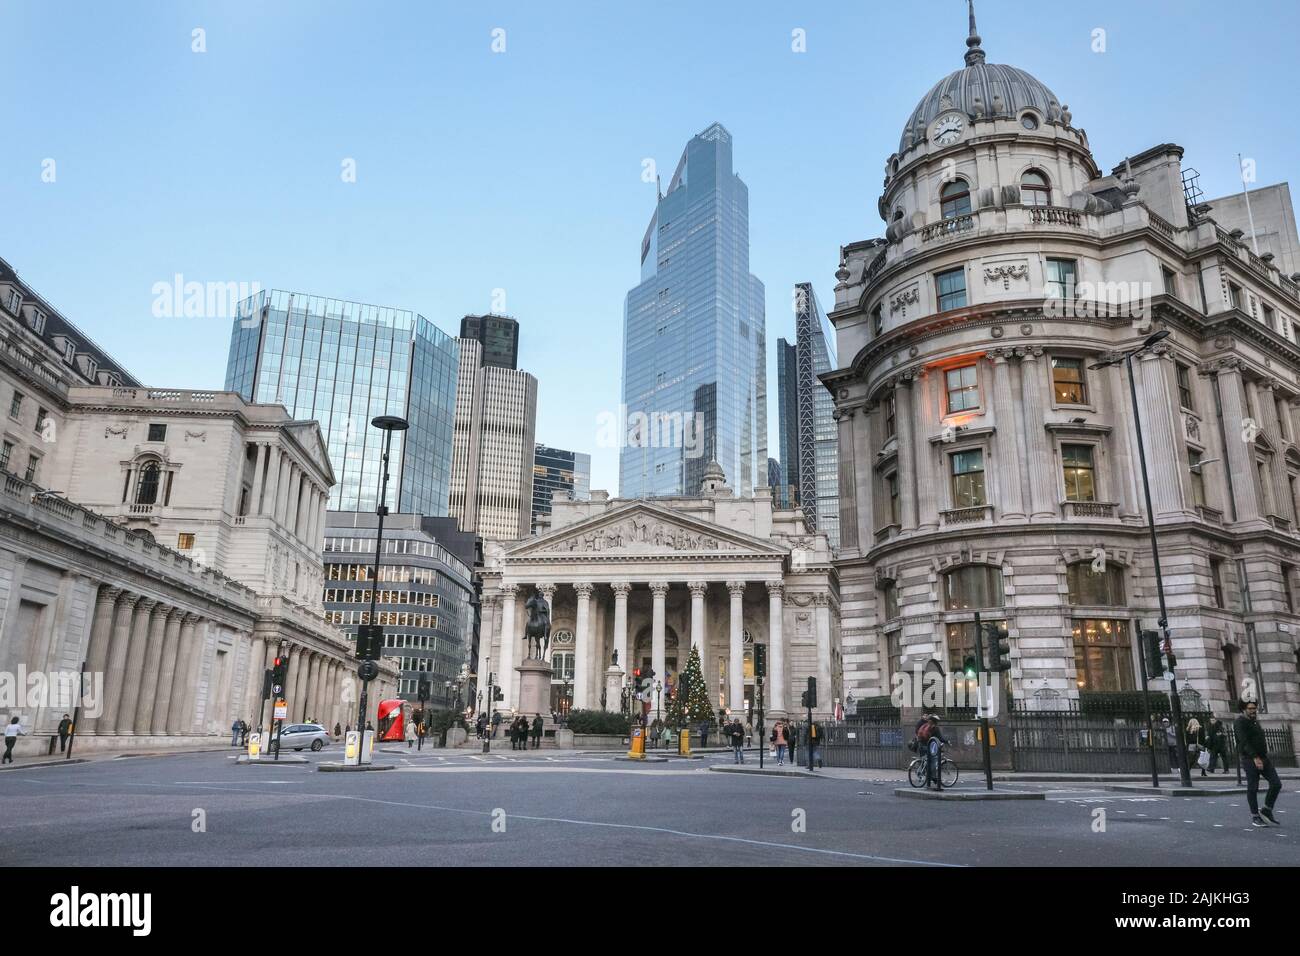 The Royal Exchange Building (centre), and Bank of England (BoE), historic architecture in the City of London, UK Stock Photo